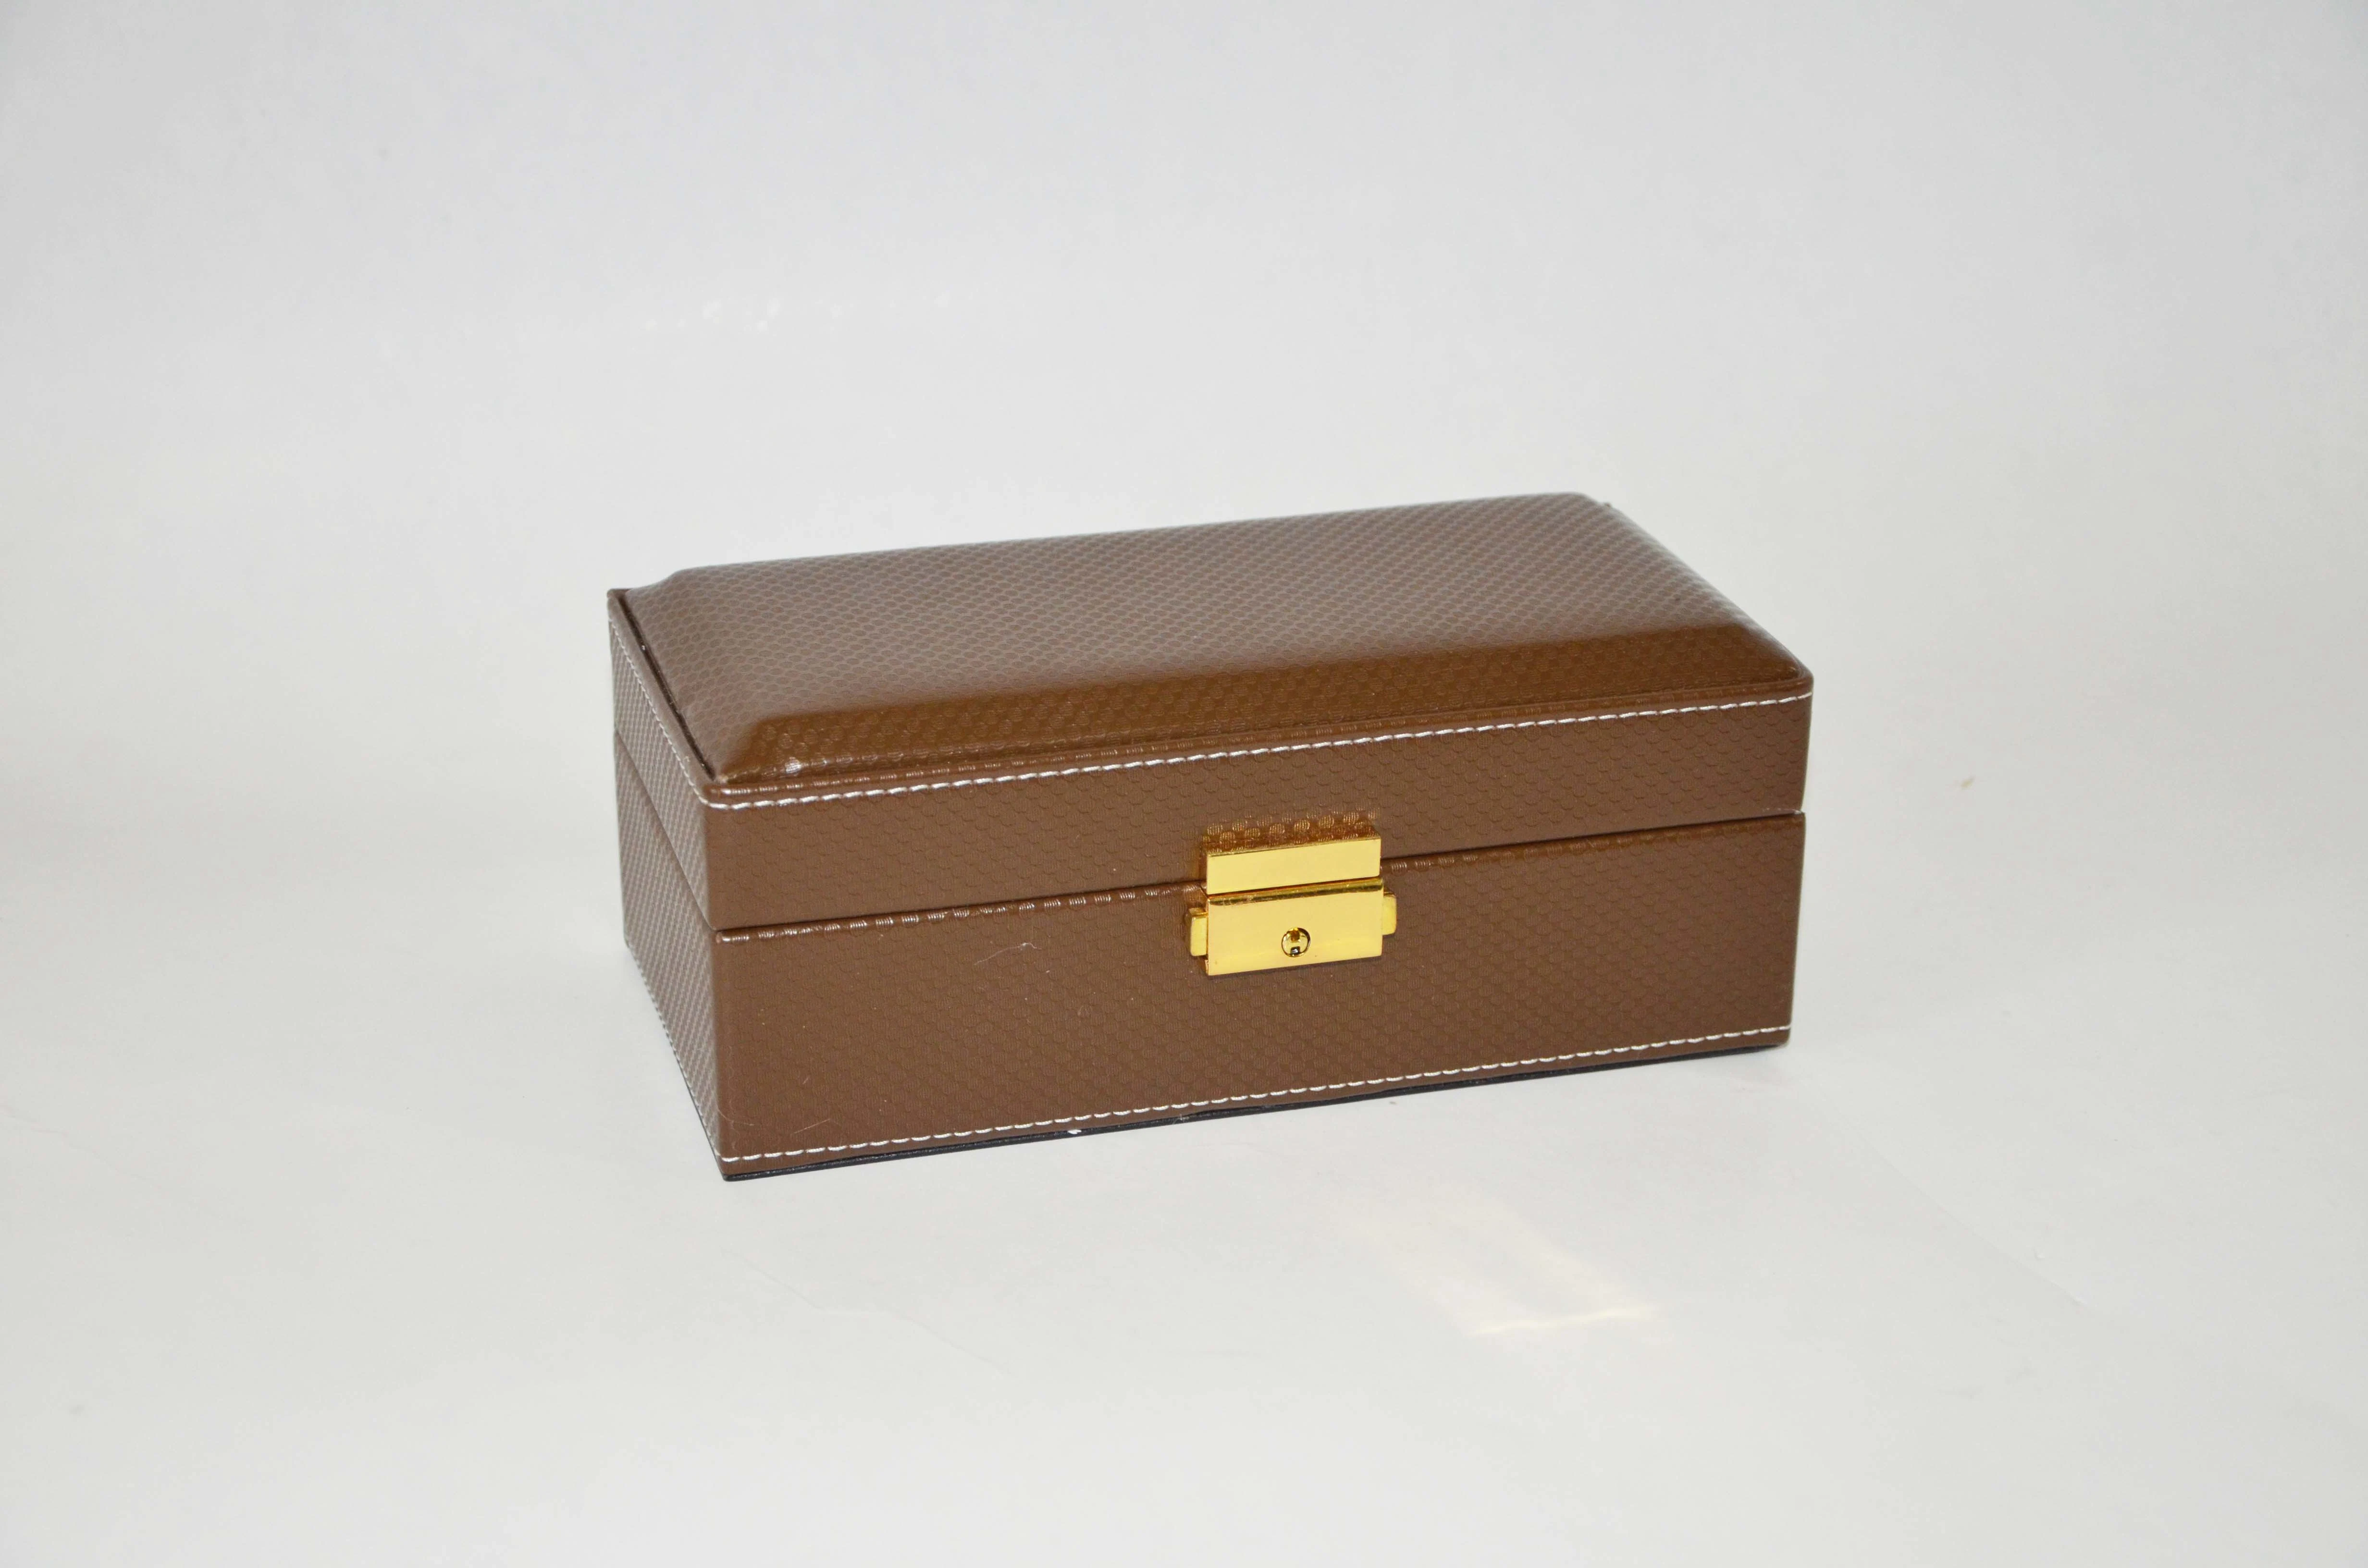 OEM Watch Cosmetic Leather Box/Watch Box for 4 Watches